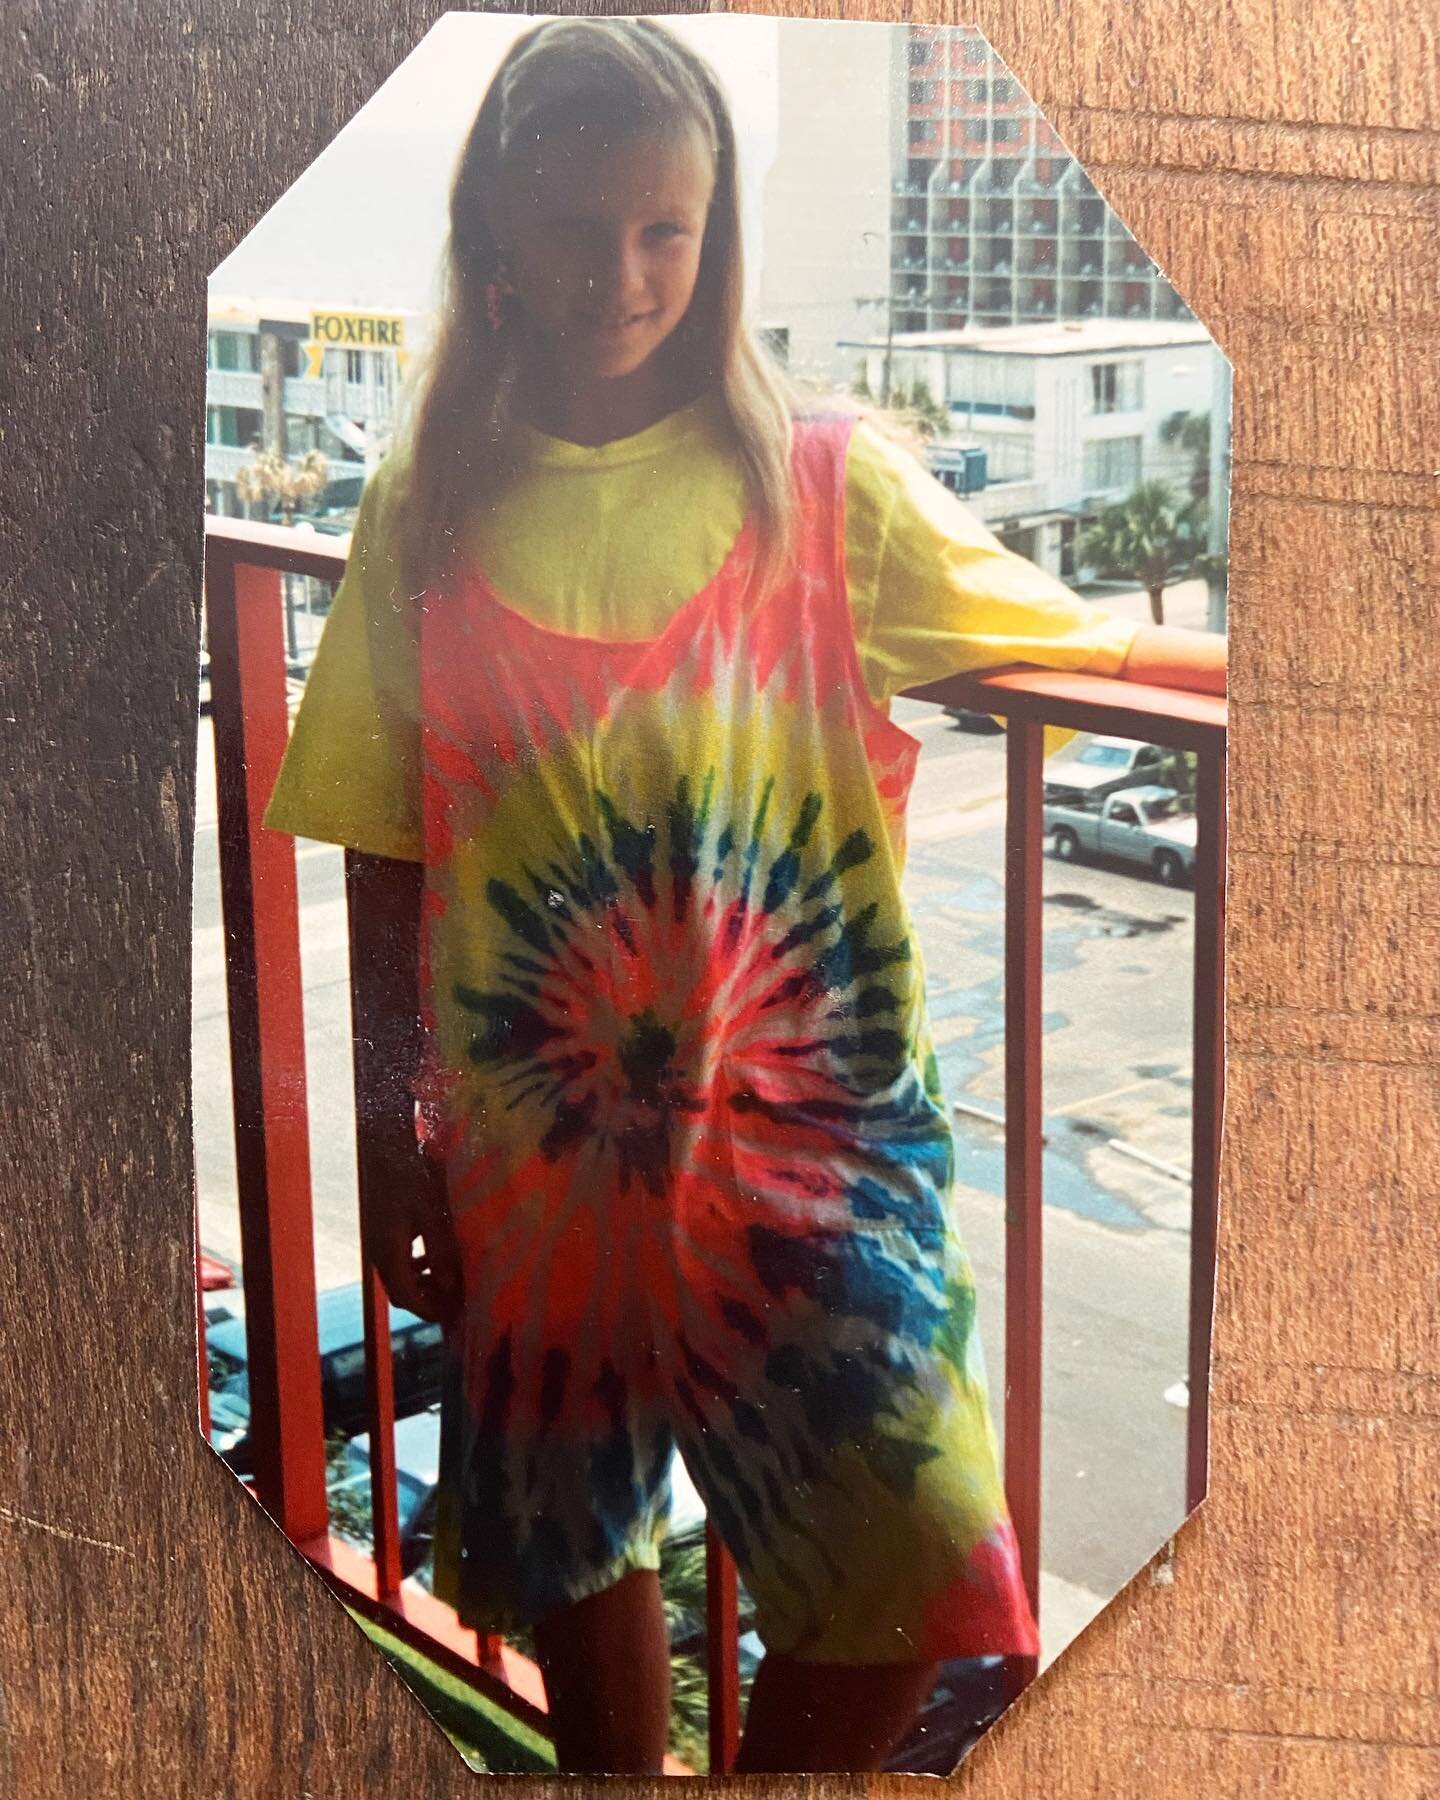 #tbt 1989 thanks for finding this one, mom. My only regret is not keeping this jumper gem to wear now a la tight-fit. We were at a Myrtle Beach motel with a coin-slot bed and mirrors on the ceiling. That&rsquo;s how my family rode in the 80s.

#80sba